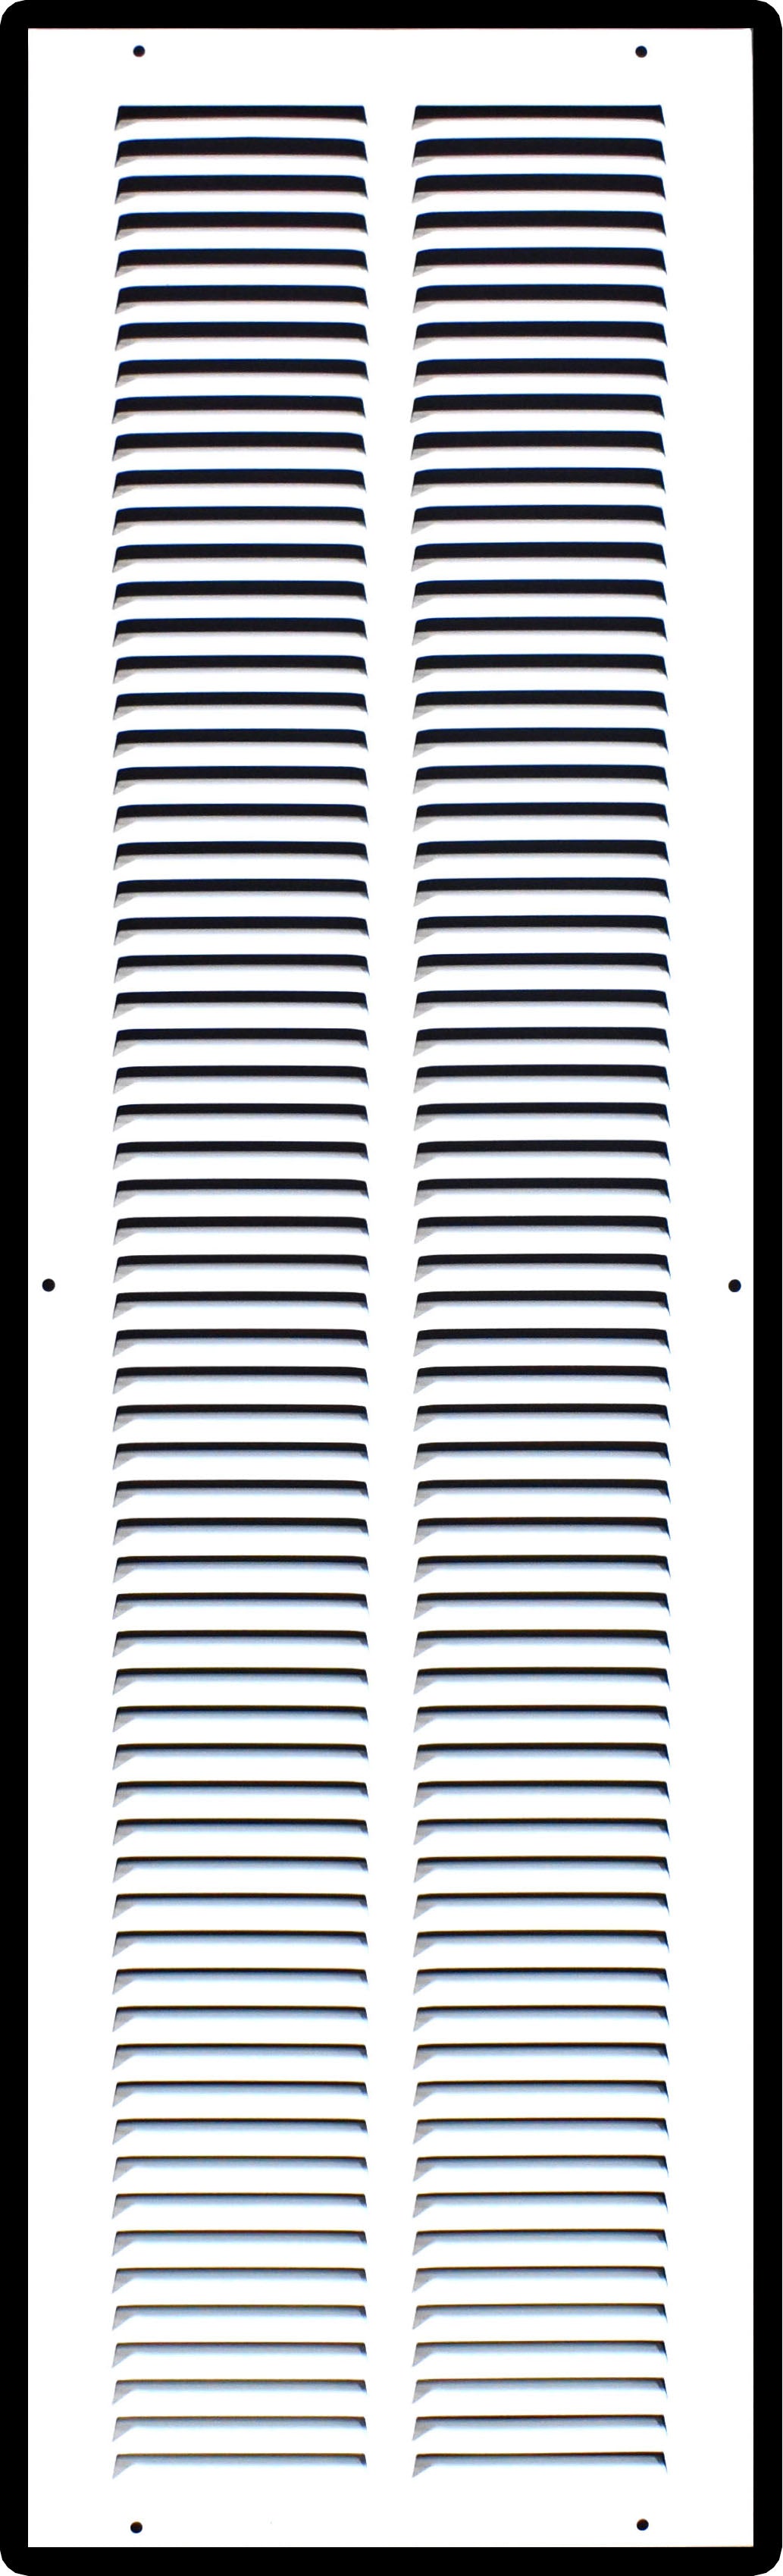 airgrilles 8" x 32" duct opening hd steel return air grille for sidewall and ceilingagc7agc-flt-wh-8x32 756014649727 1